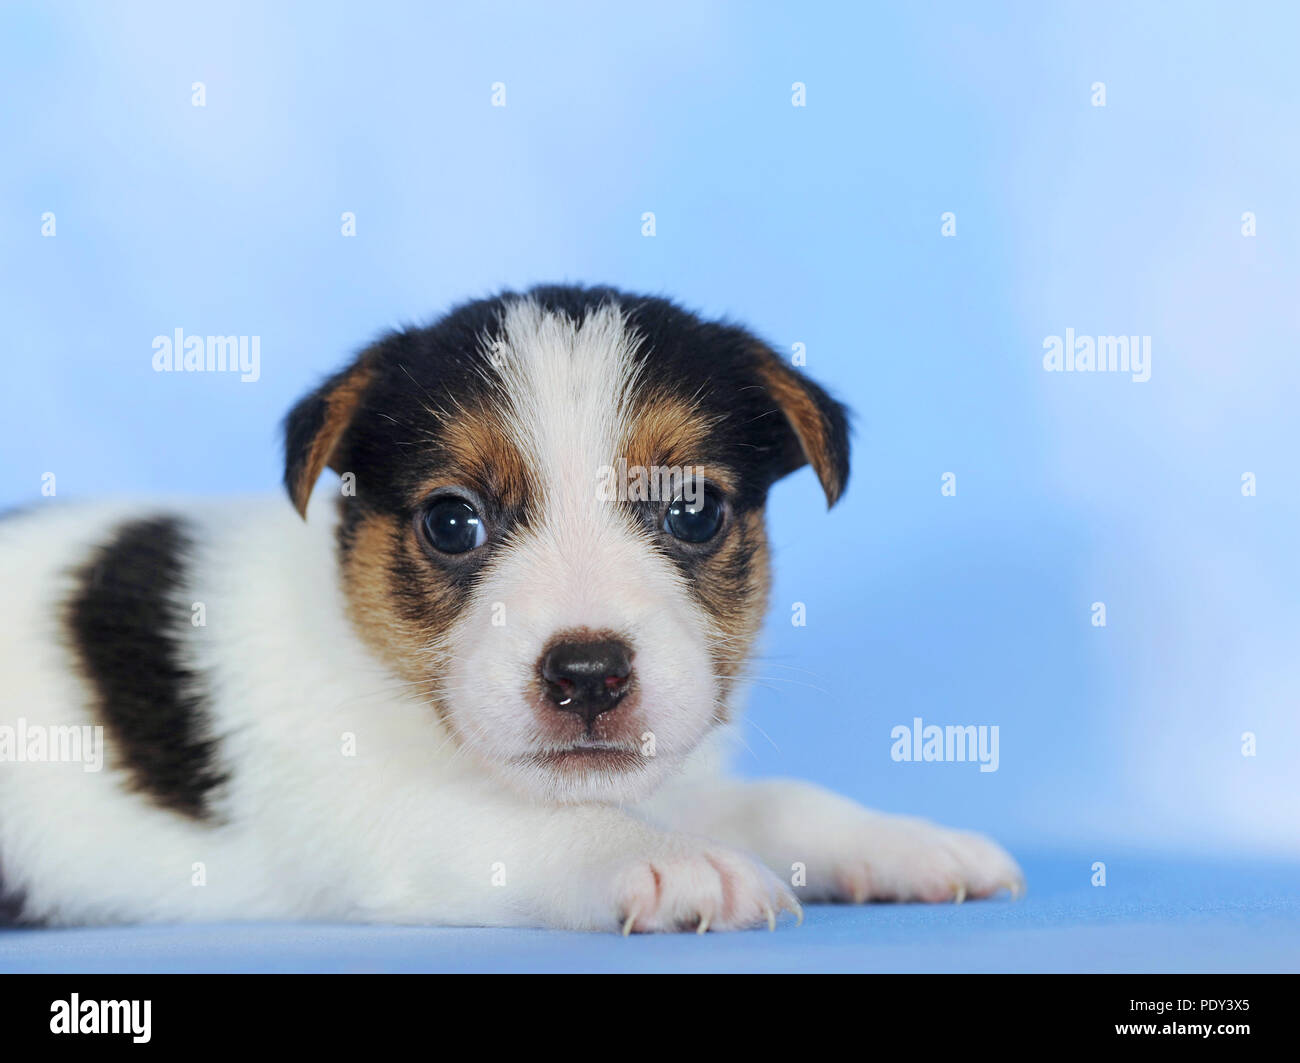 Jack Russell Terrier, brown white and tricolor, puppy, 6 weeks, animal portrait, studio shot, Austria Stock Photo